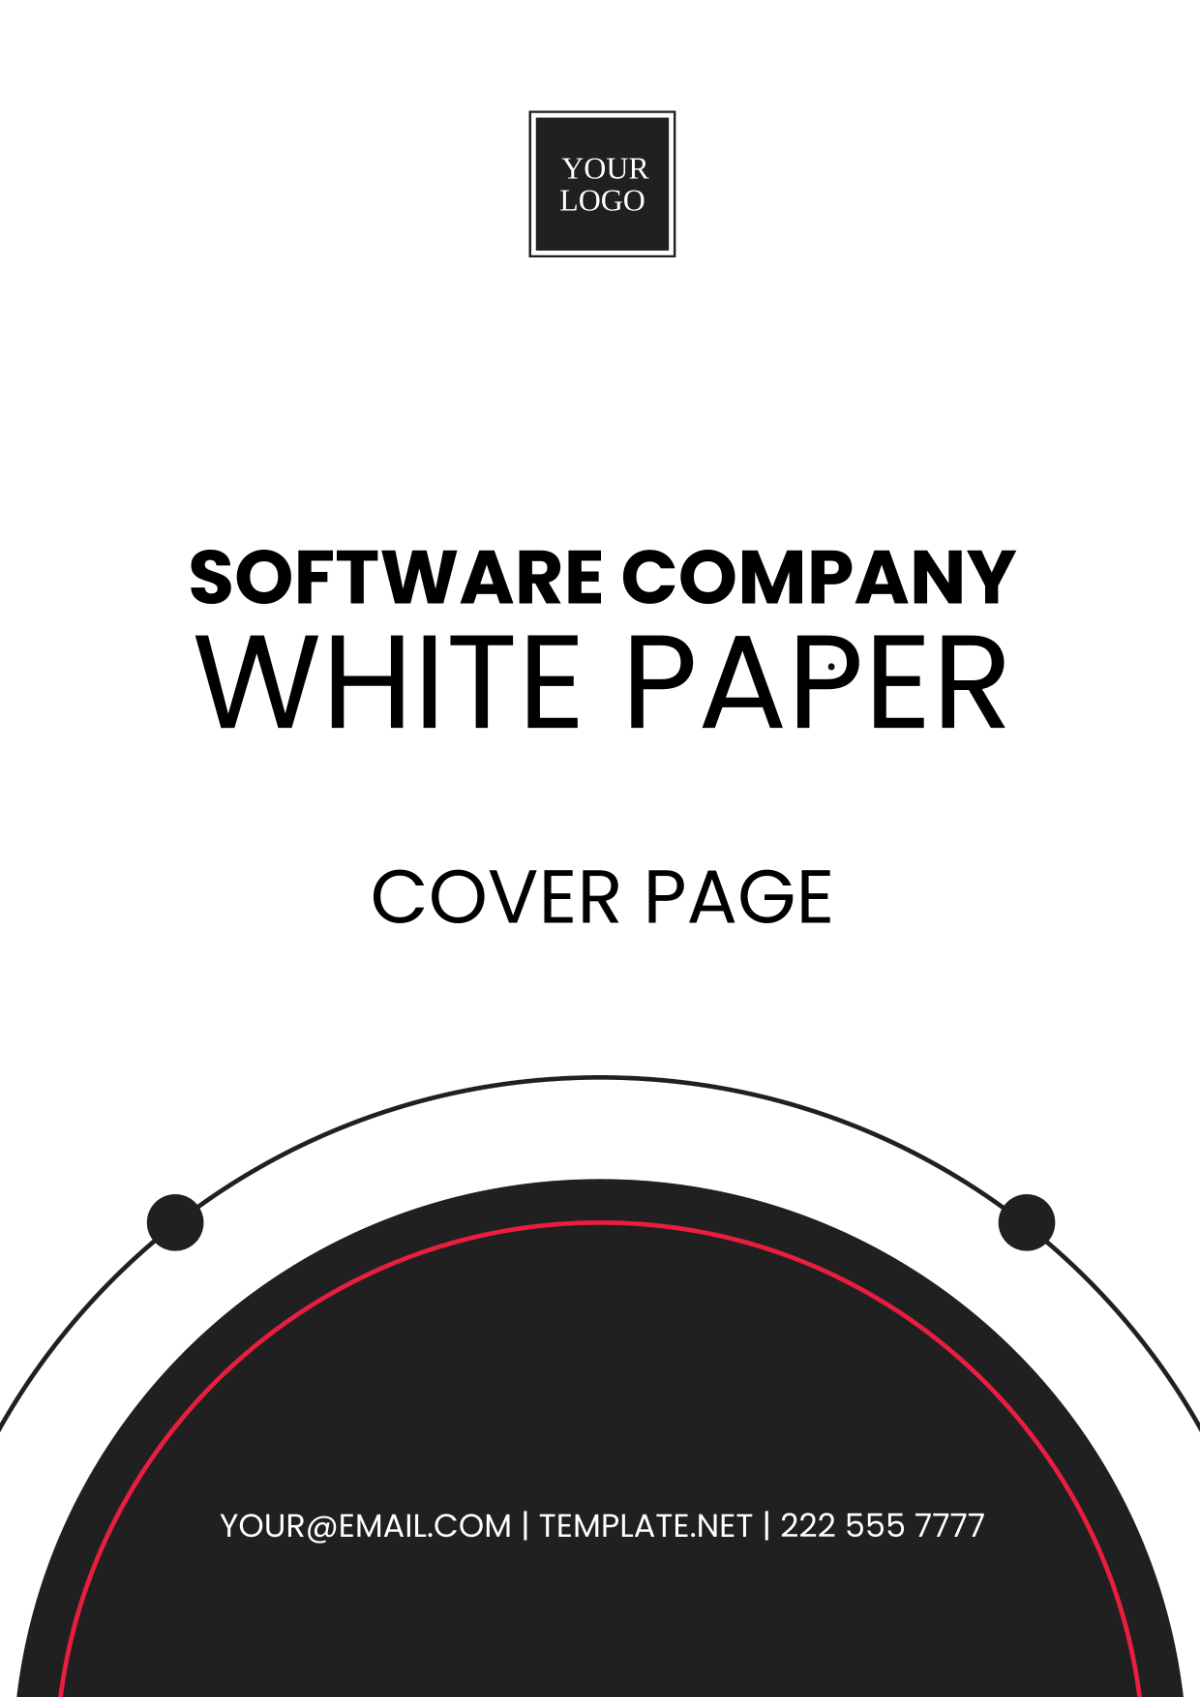 Software Company White Paper Cover Page Template